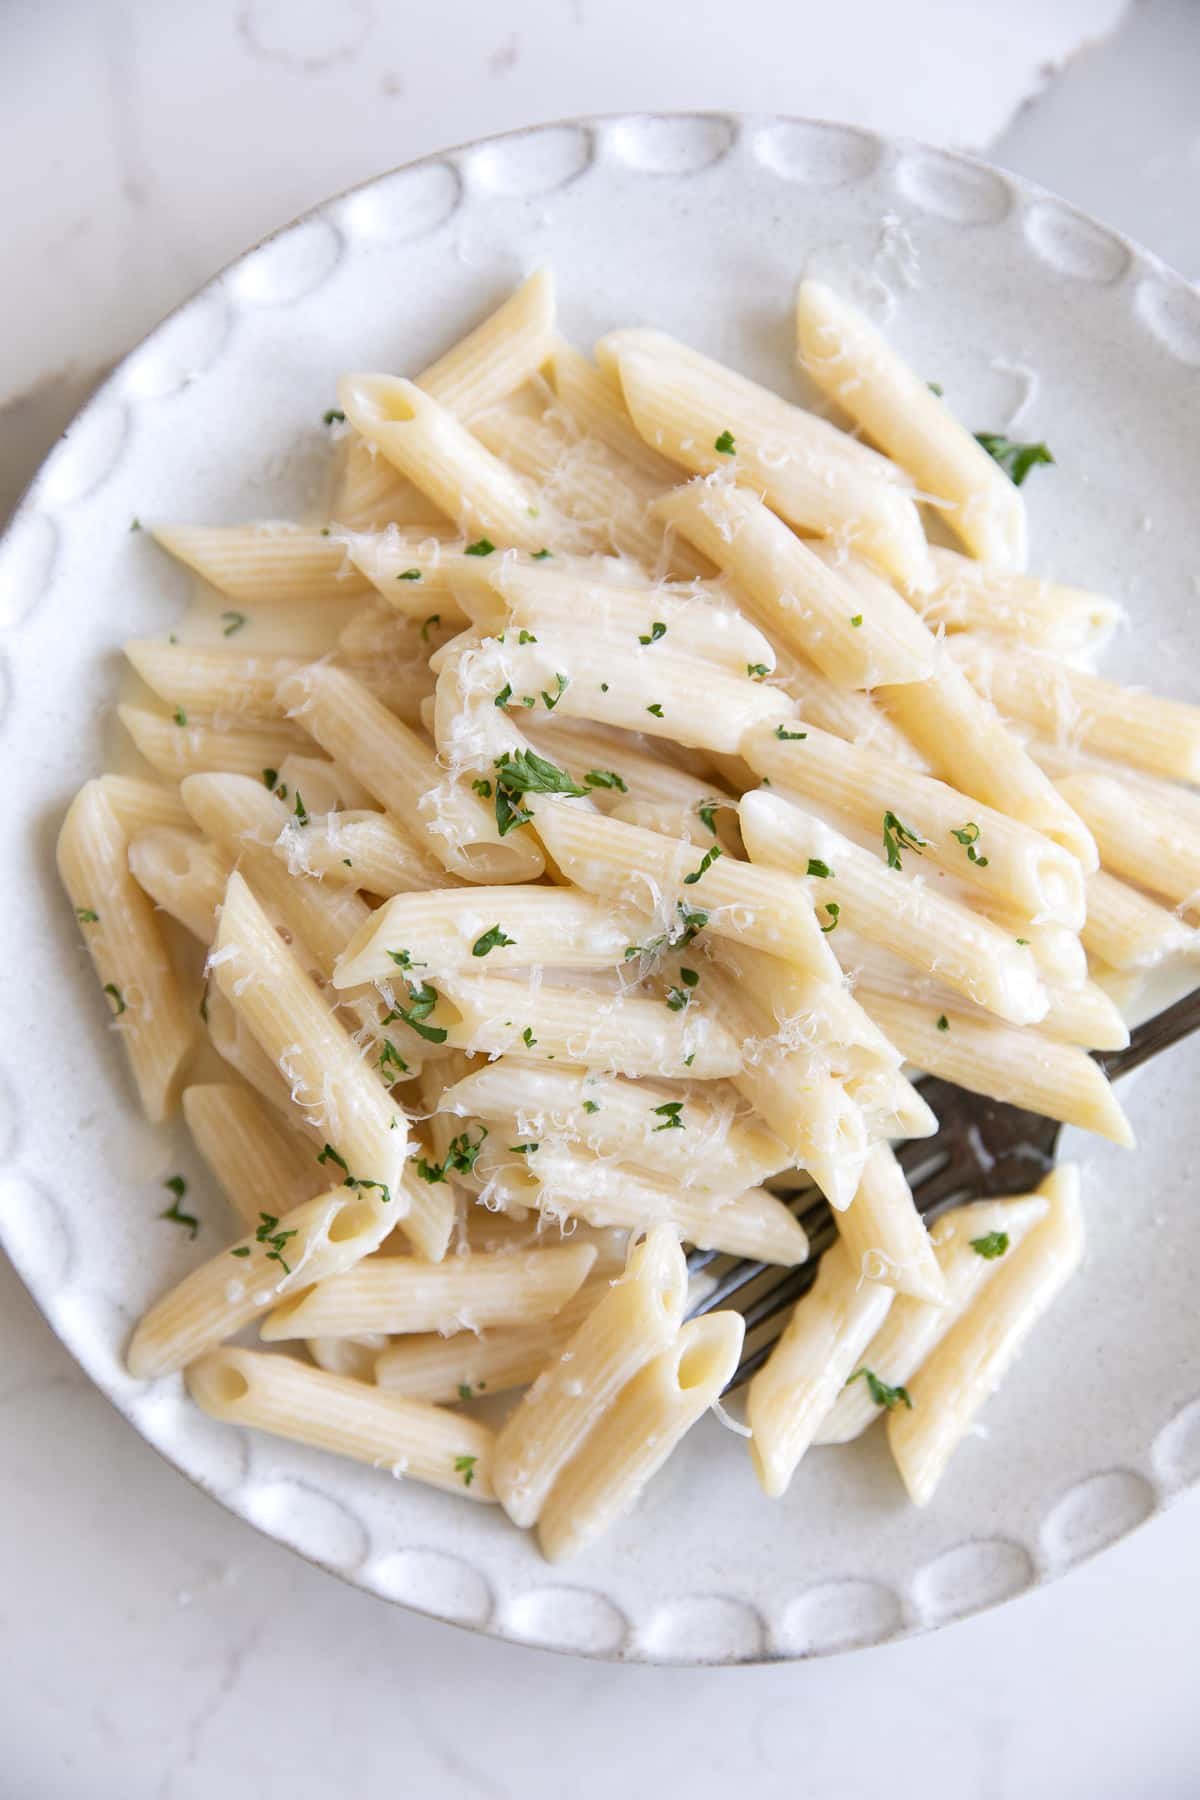 Bedachtzaam Discrepantie Stuwkracht Creamy Penne Pasta Recipe - The Forked Spoon